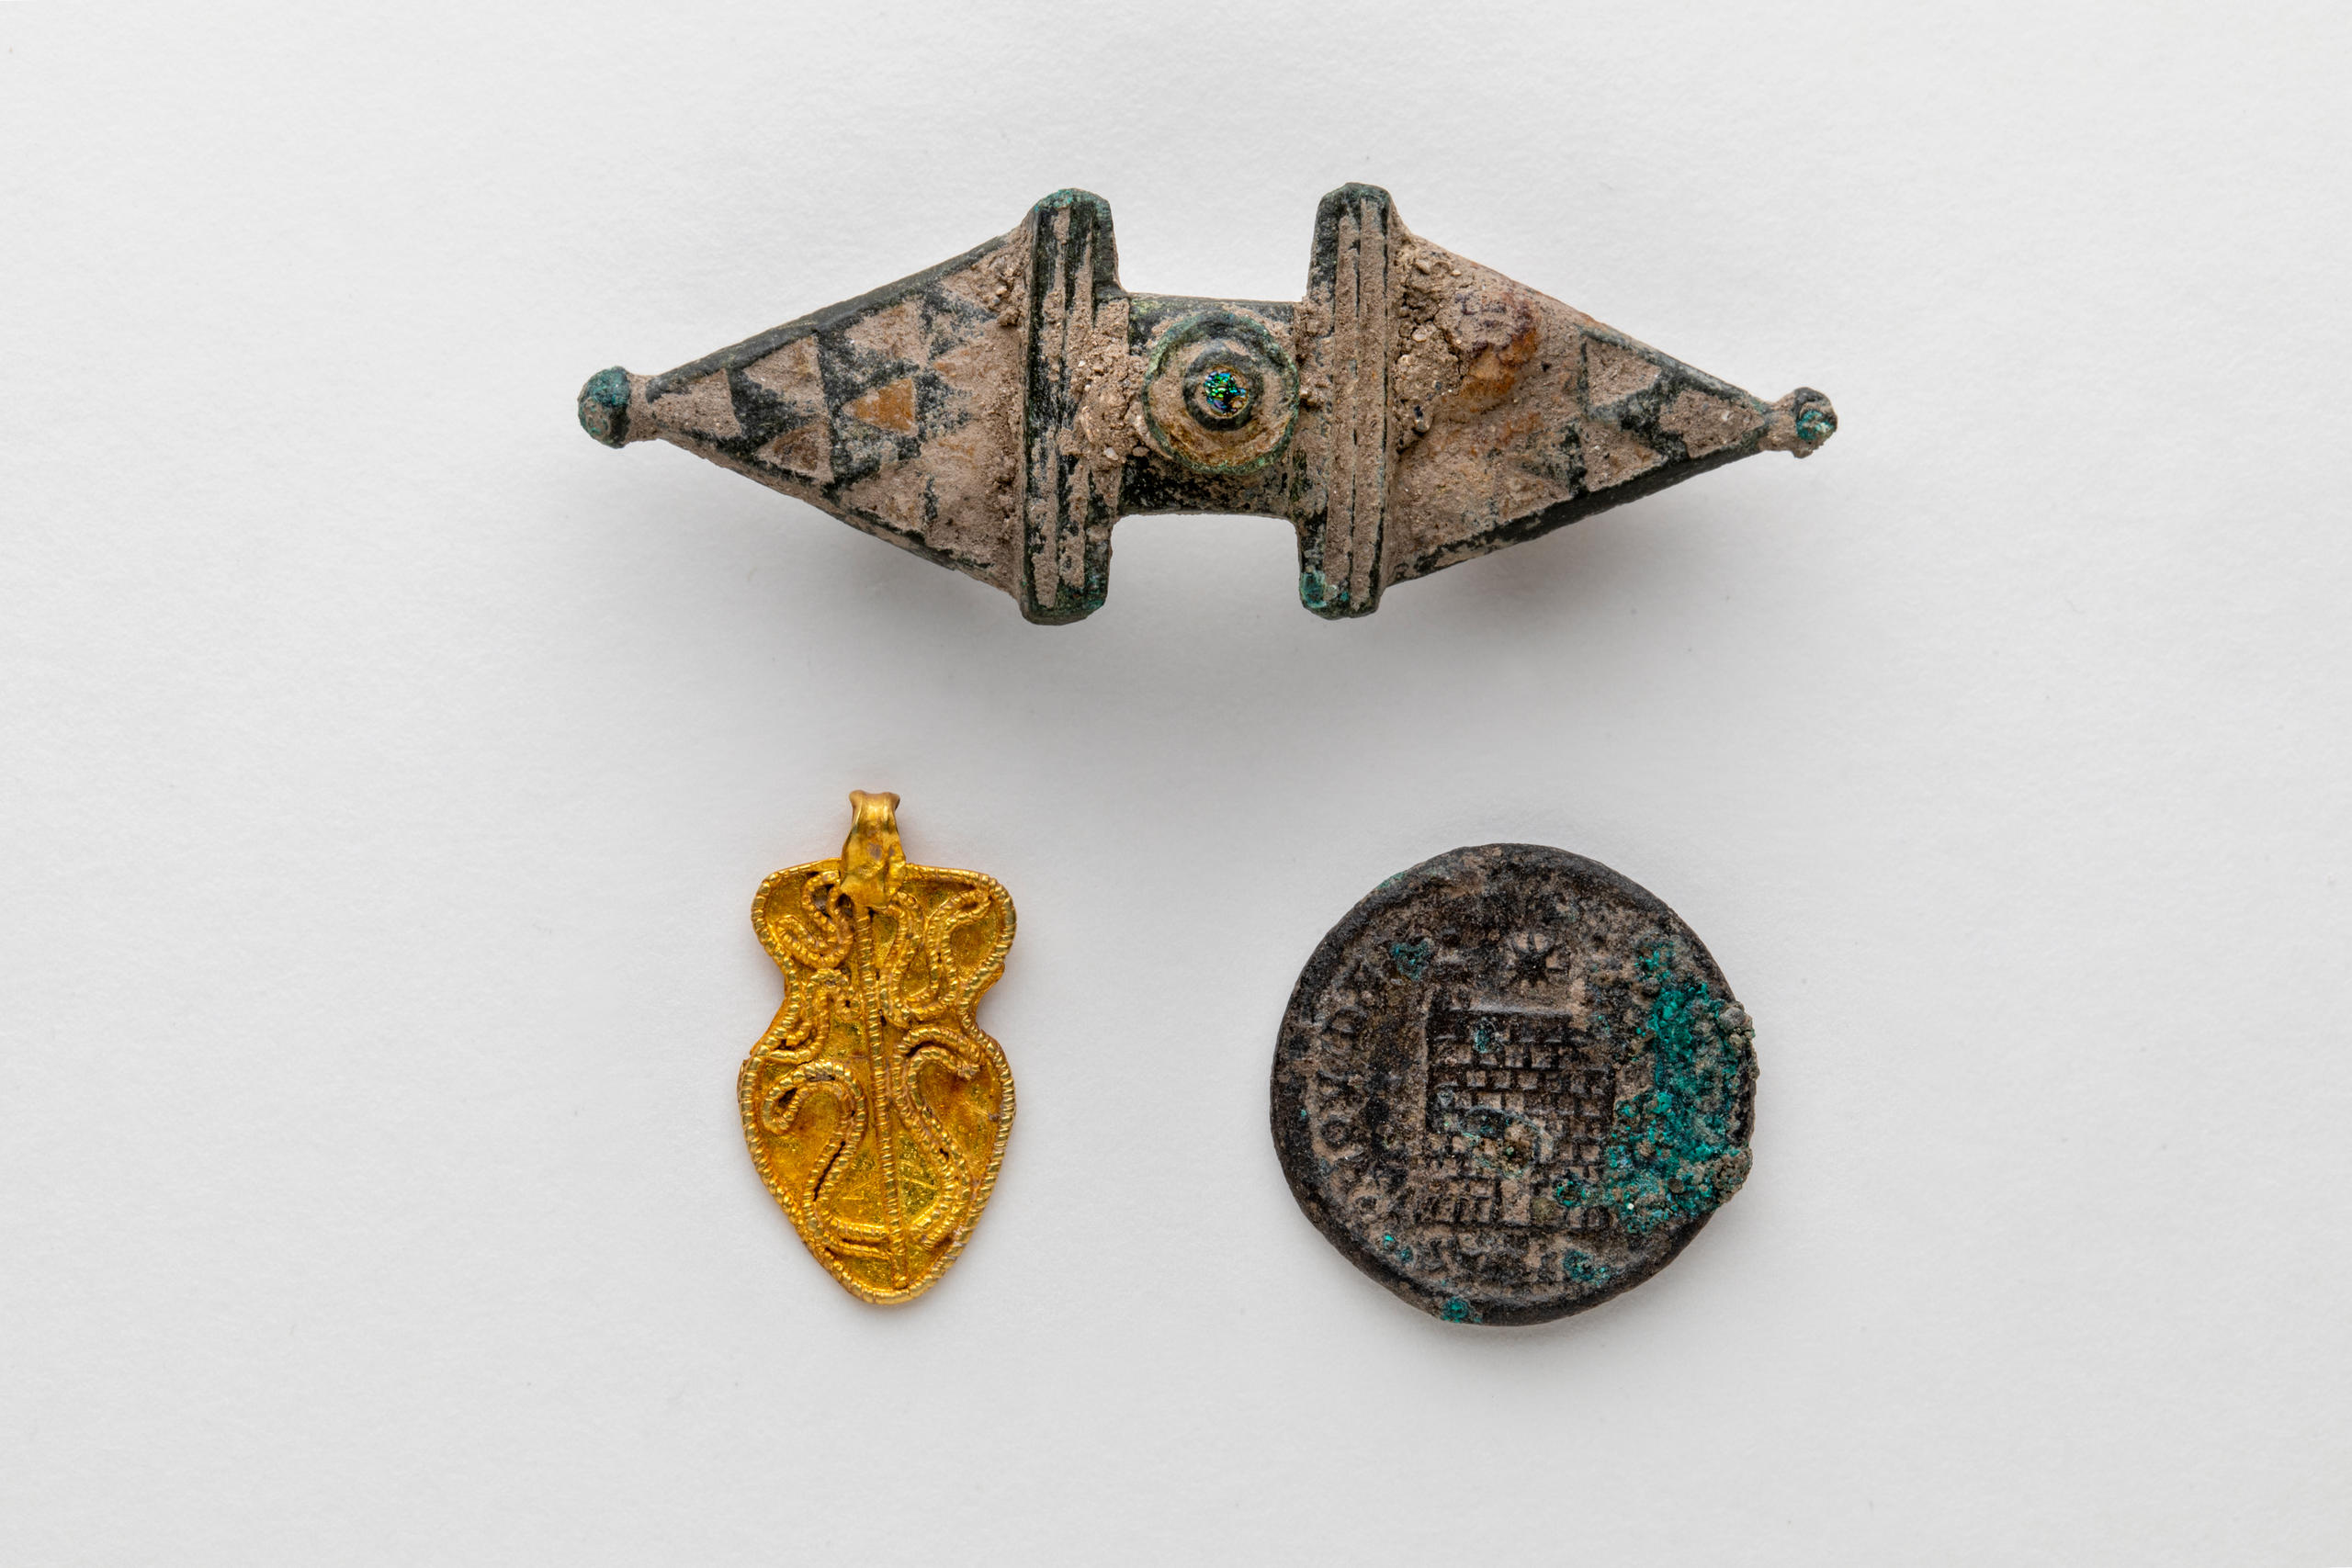 Roman coins, a broach and gold pendant